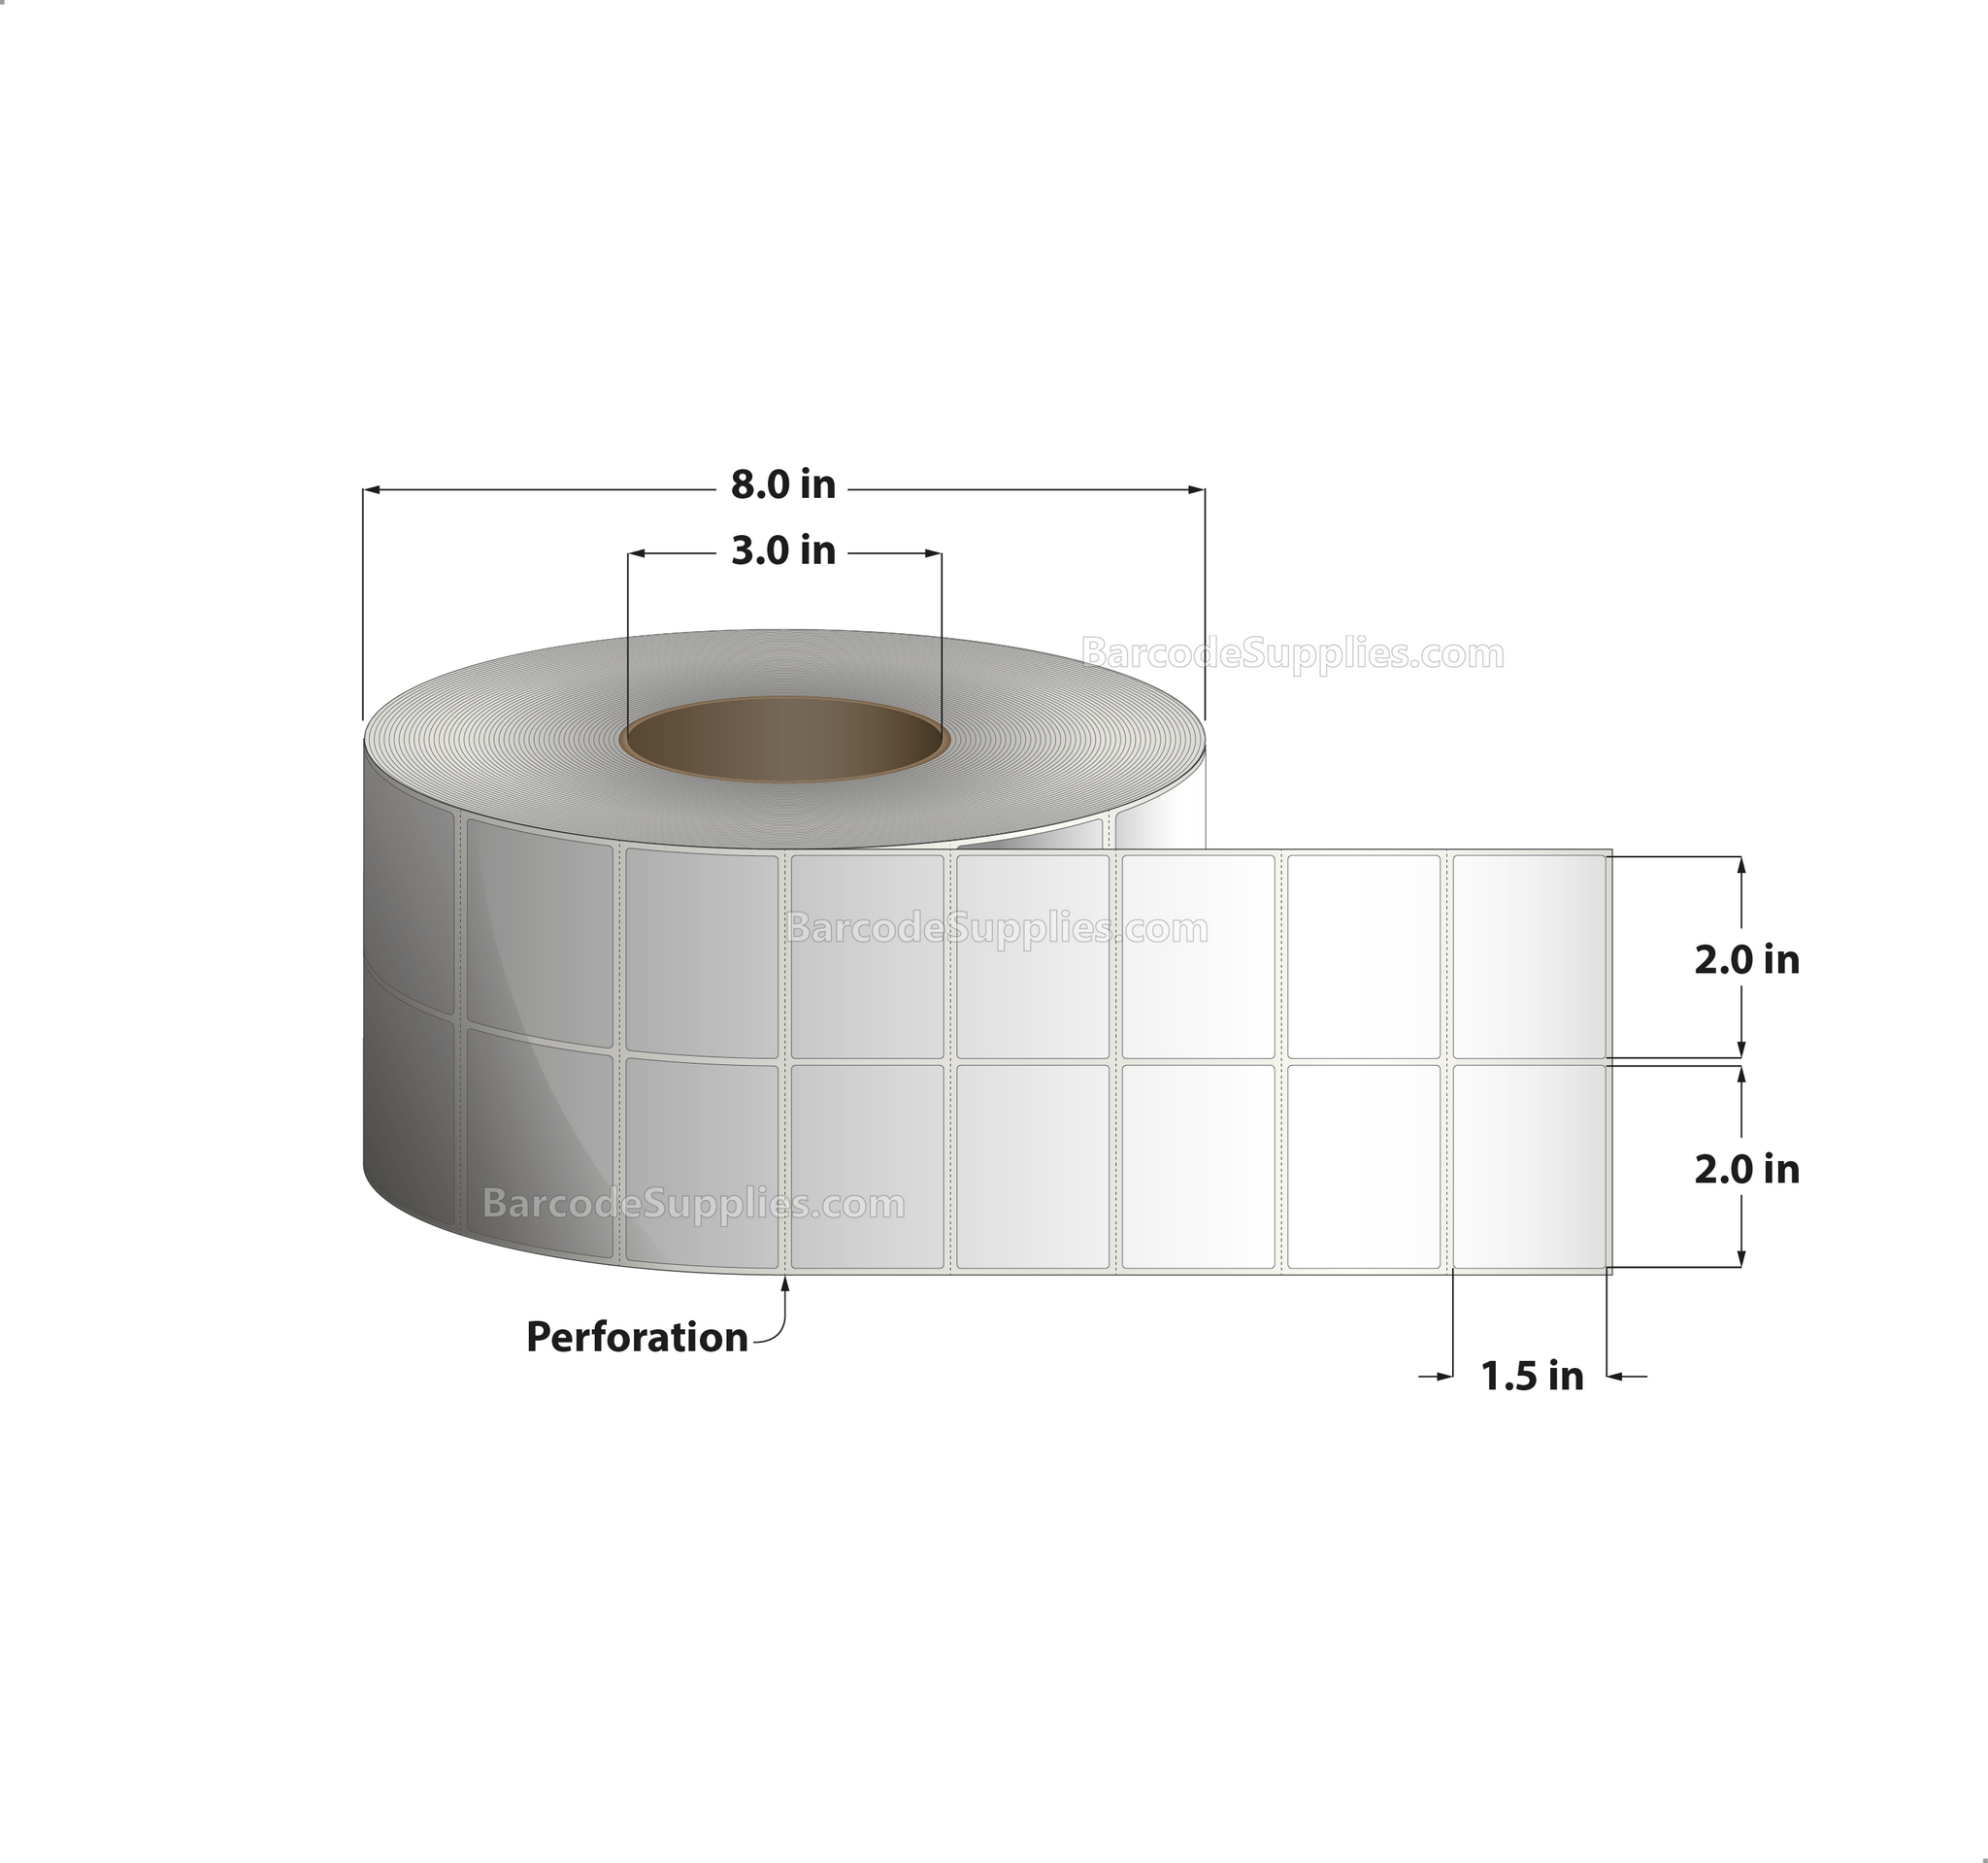 2 x 1.5 Thermal Transfer White Labels With Permanent Adhesive - Perforated - 7200 Labels Per Roll - Carton Of 4 Rolls - 28800 Labels Total - MPN: RT-2-15-7200-3